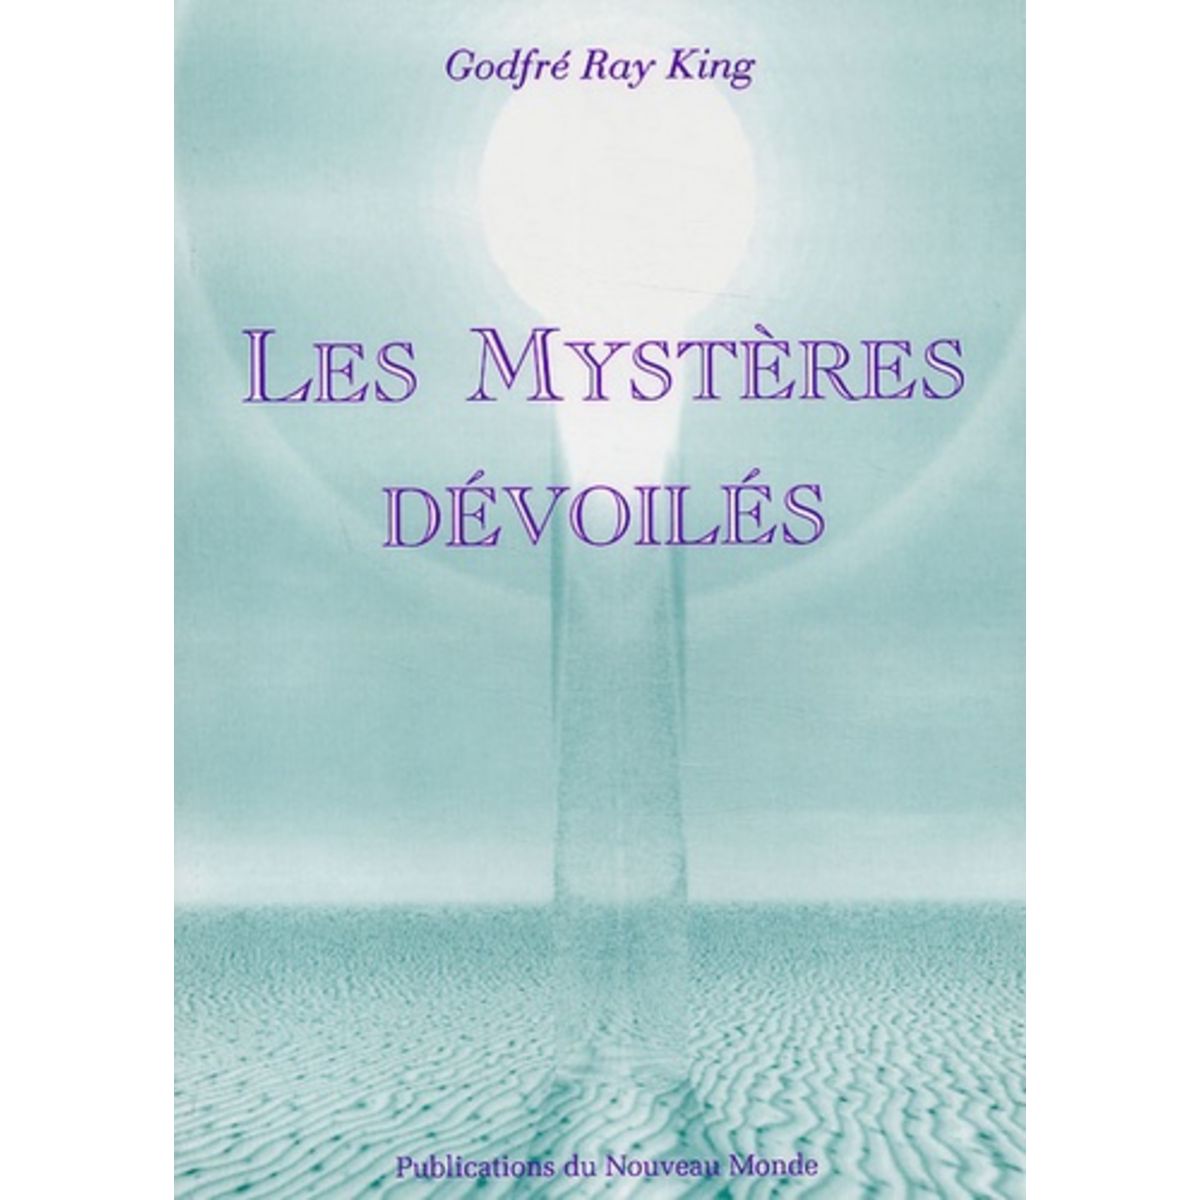  LES MYSTERES DEVOILES, Ray King Godfré